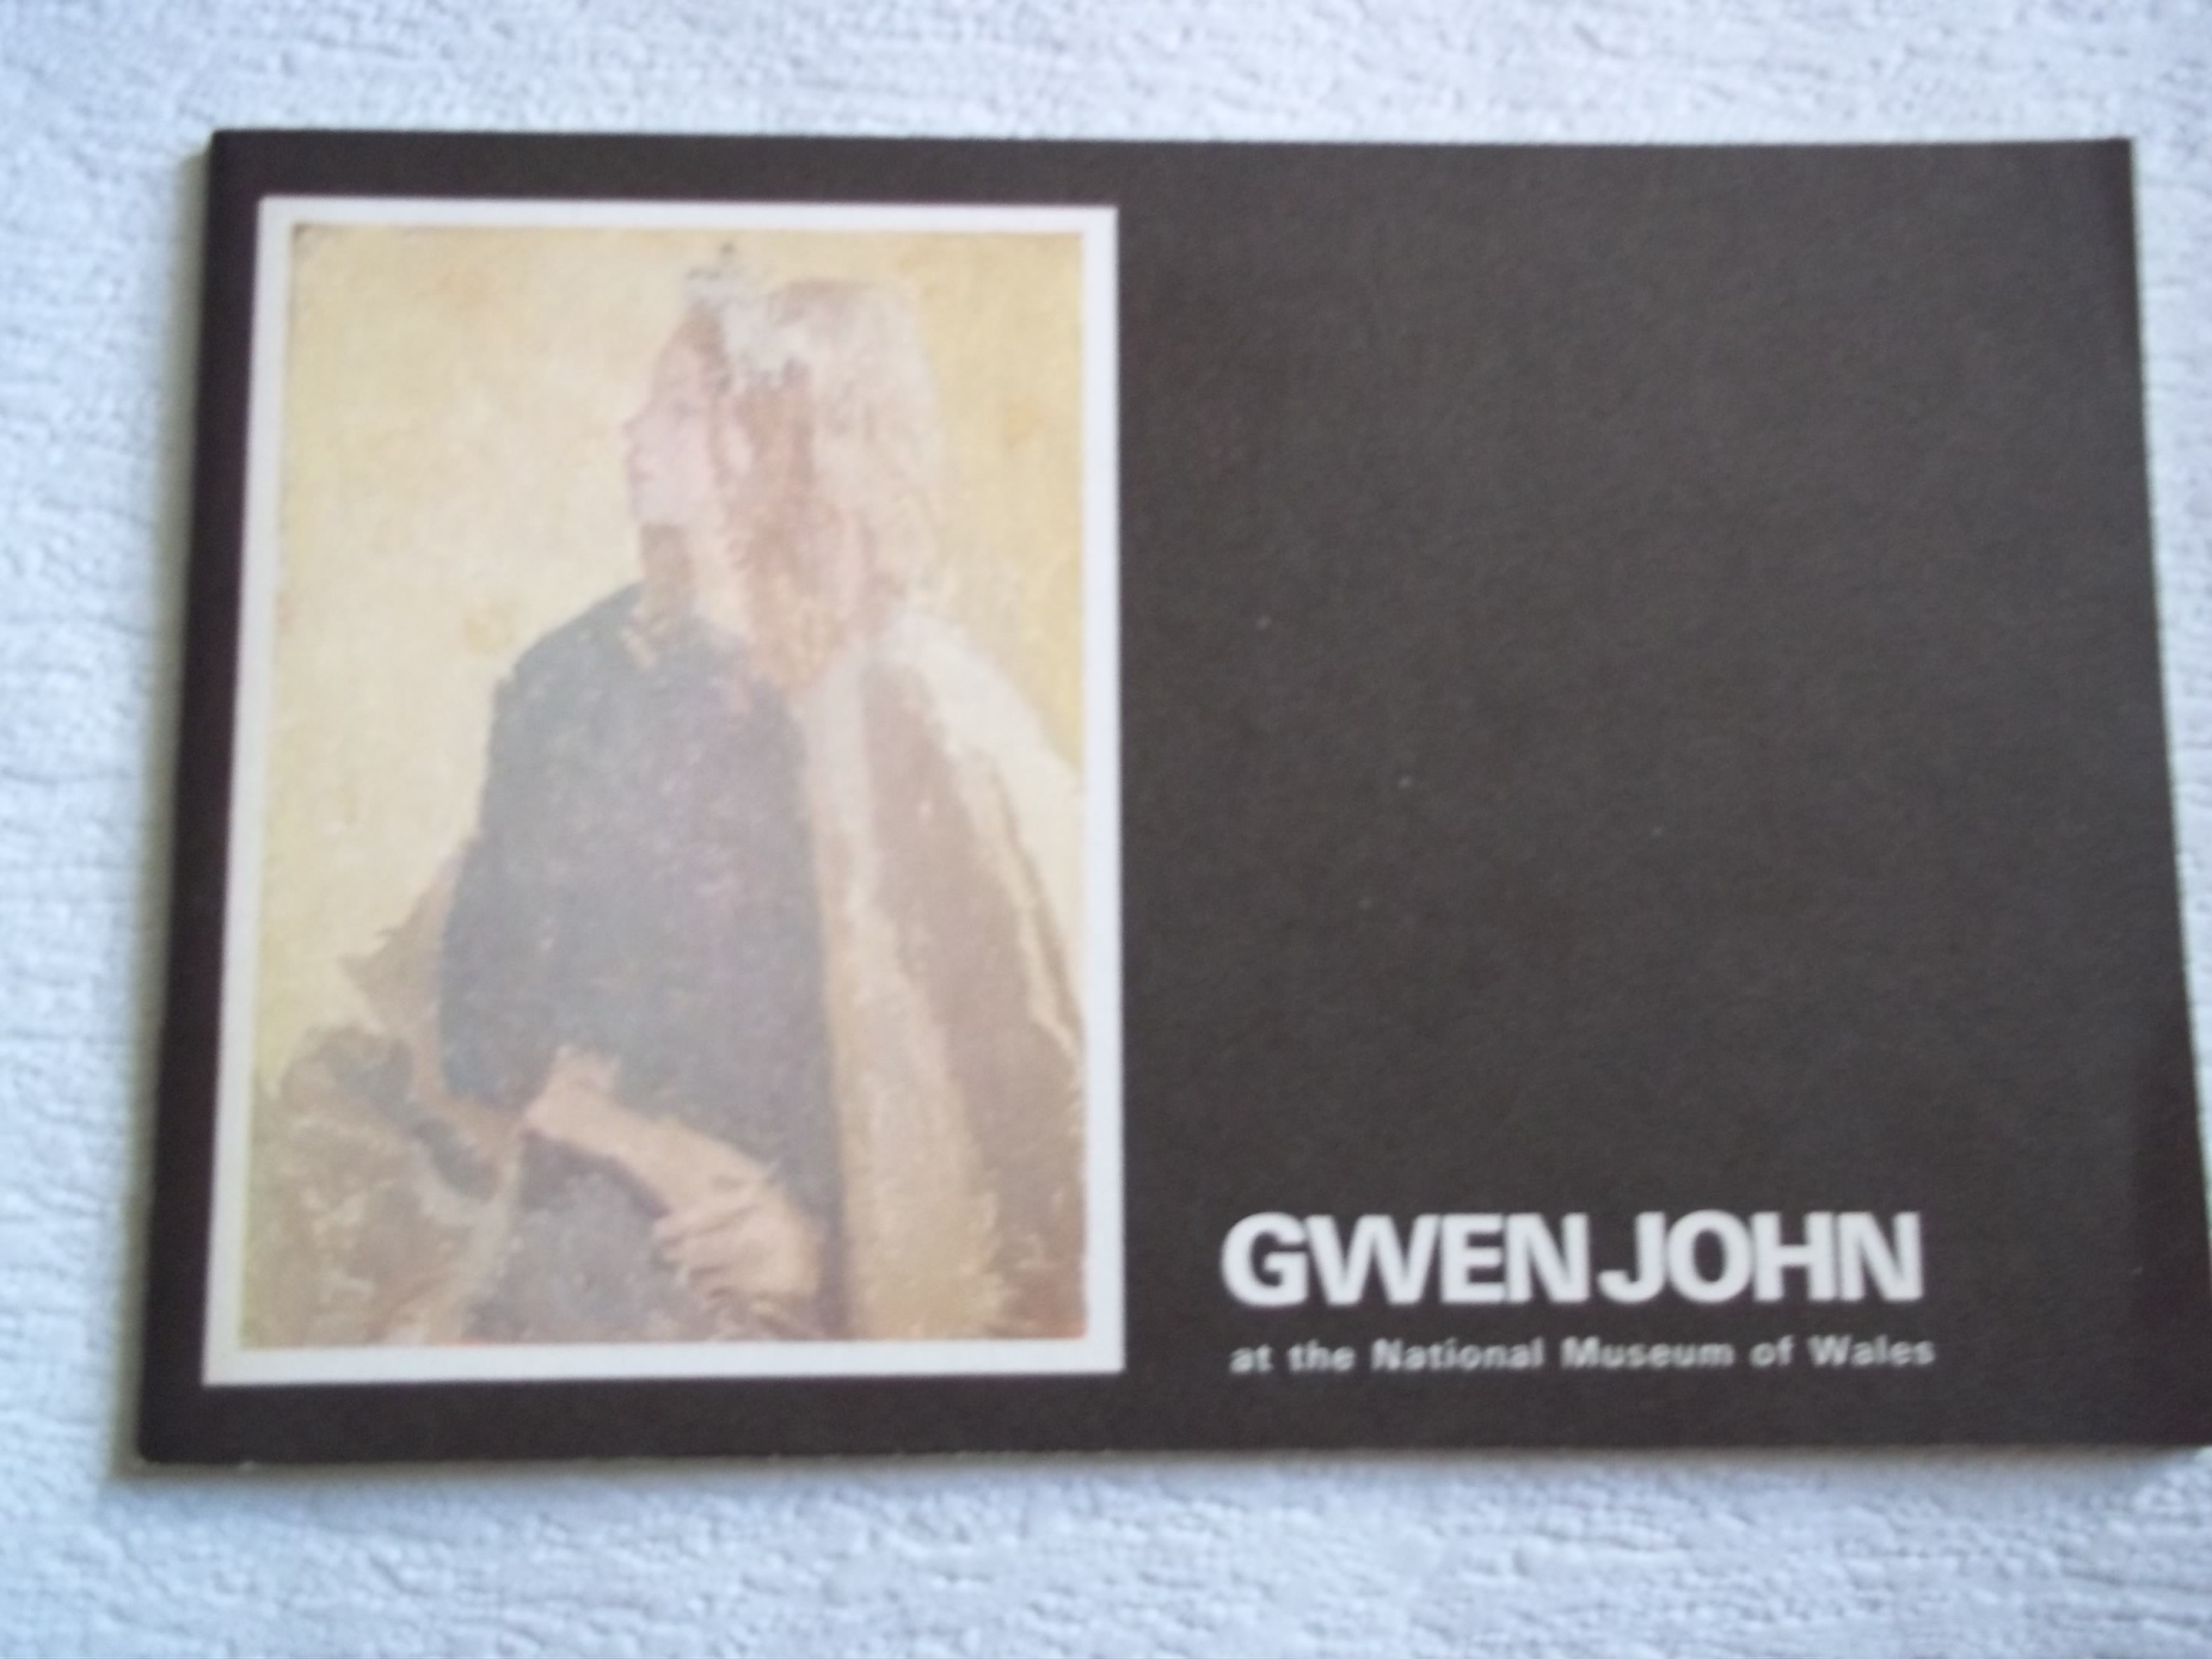 Gwen John at the National Museum of Wales - Jenkins, Anthony David Fraser